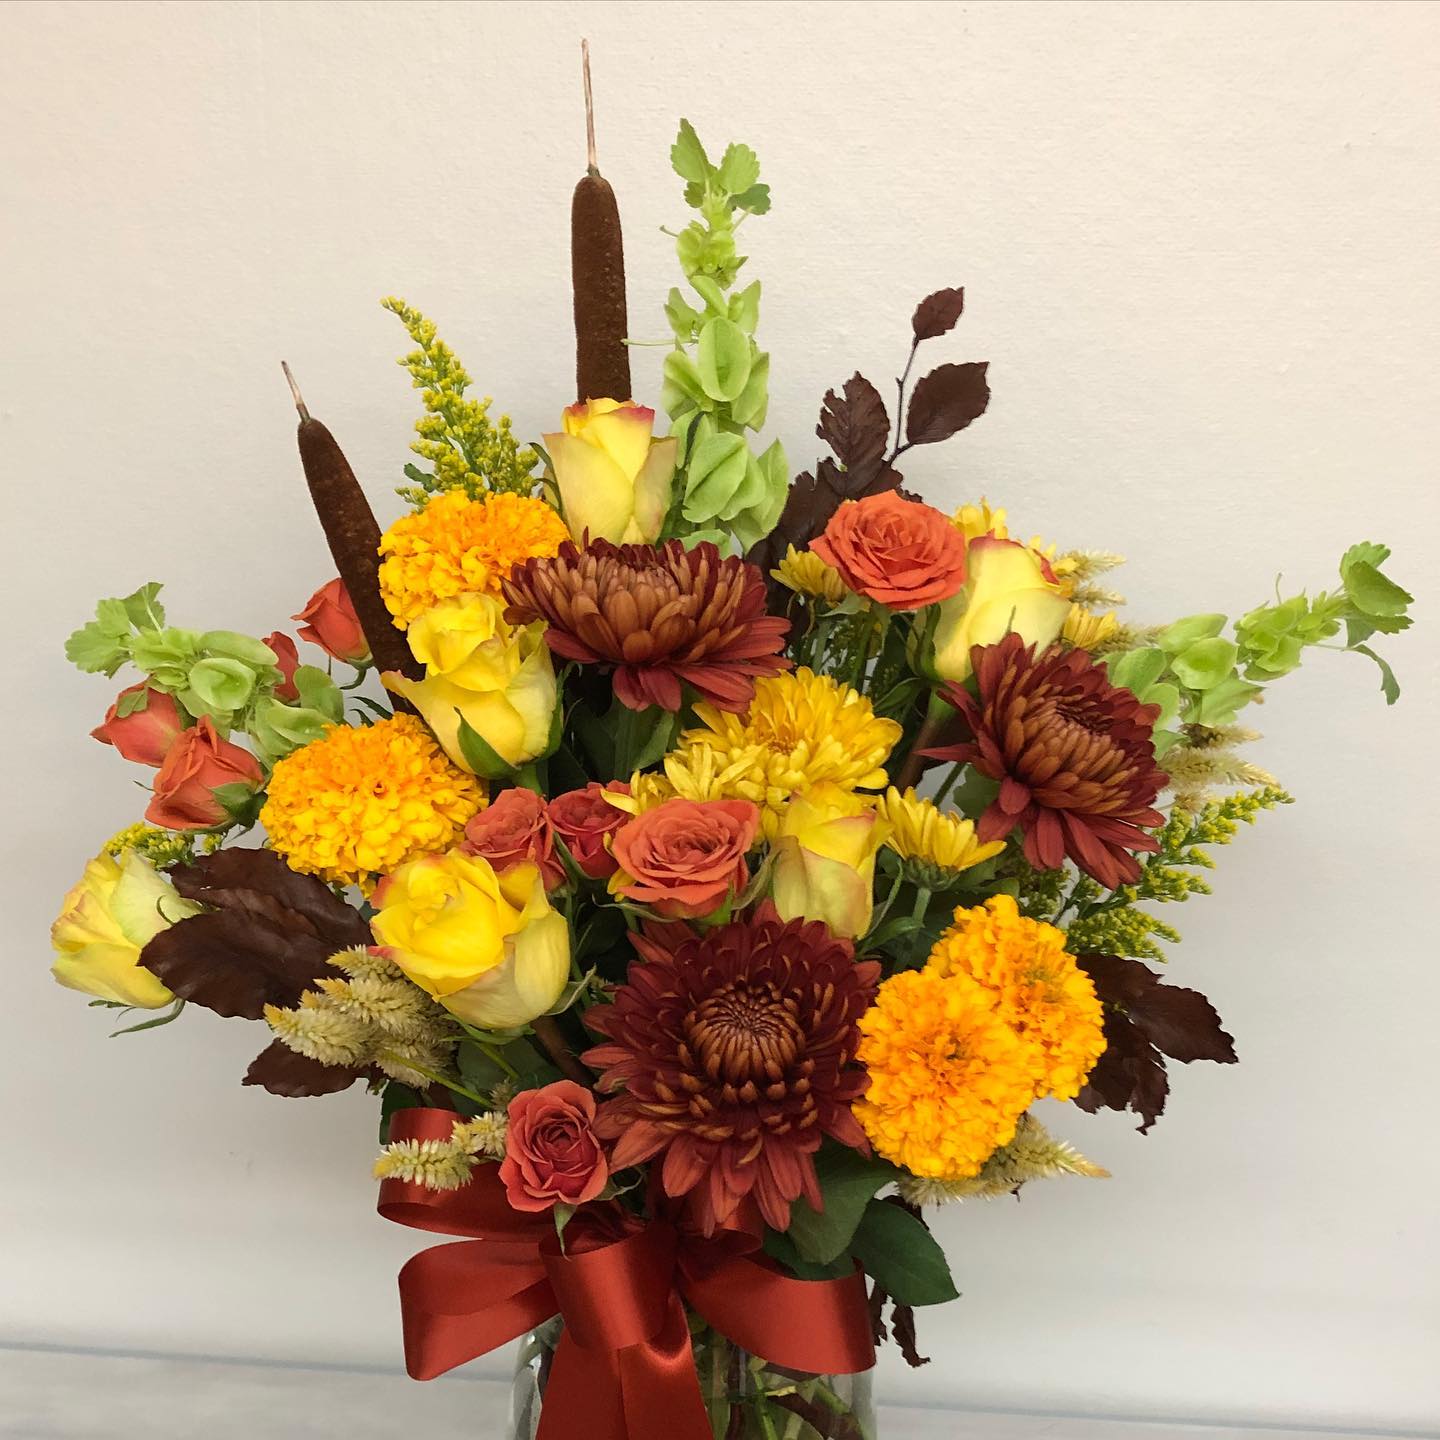 Flowers By Guenthers Onalaska Around